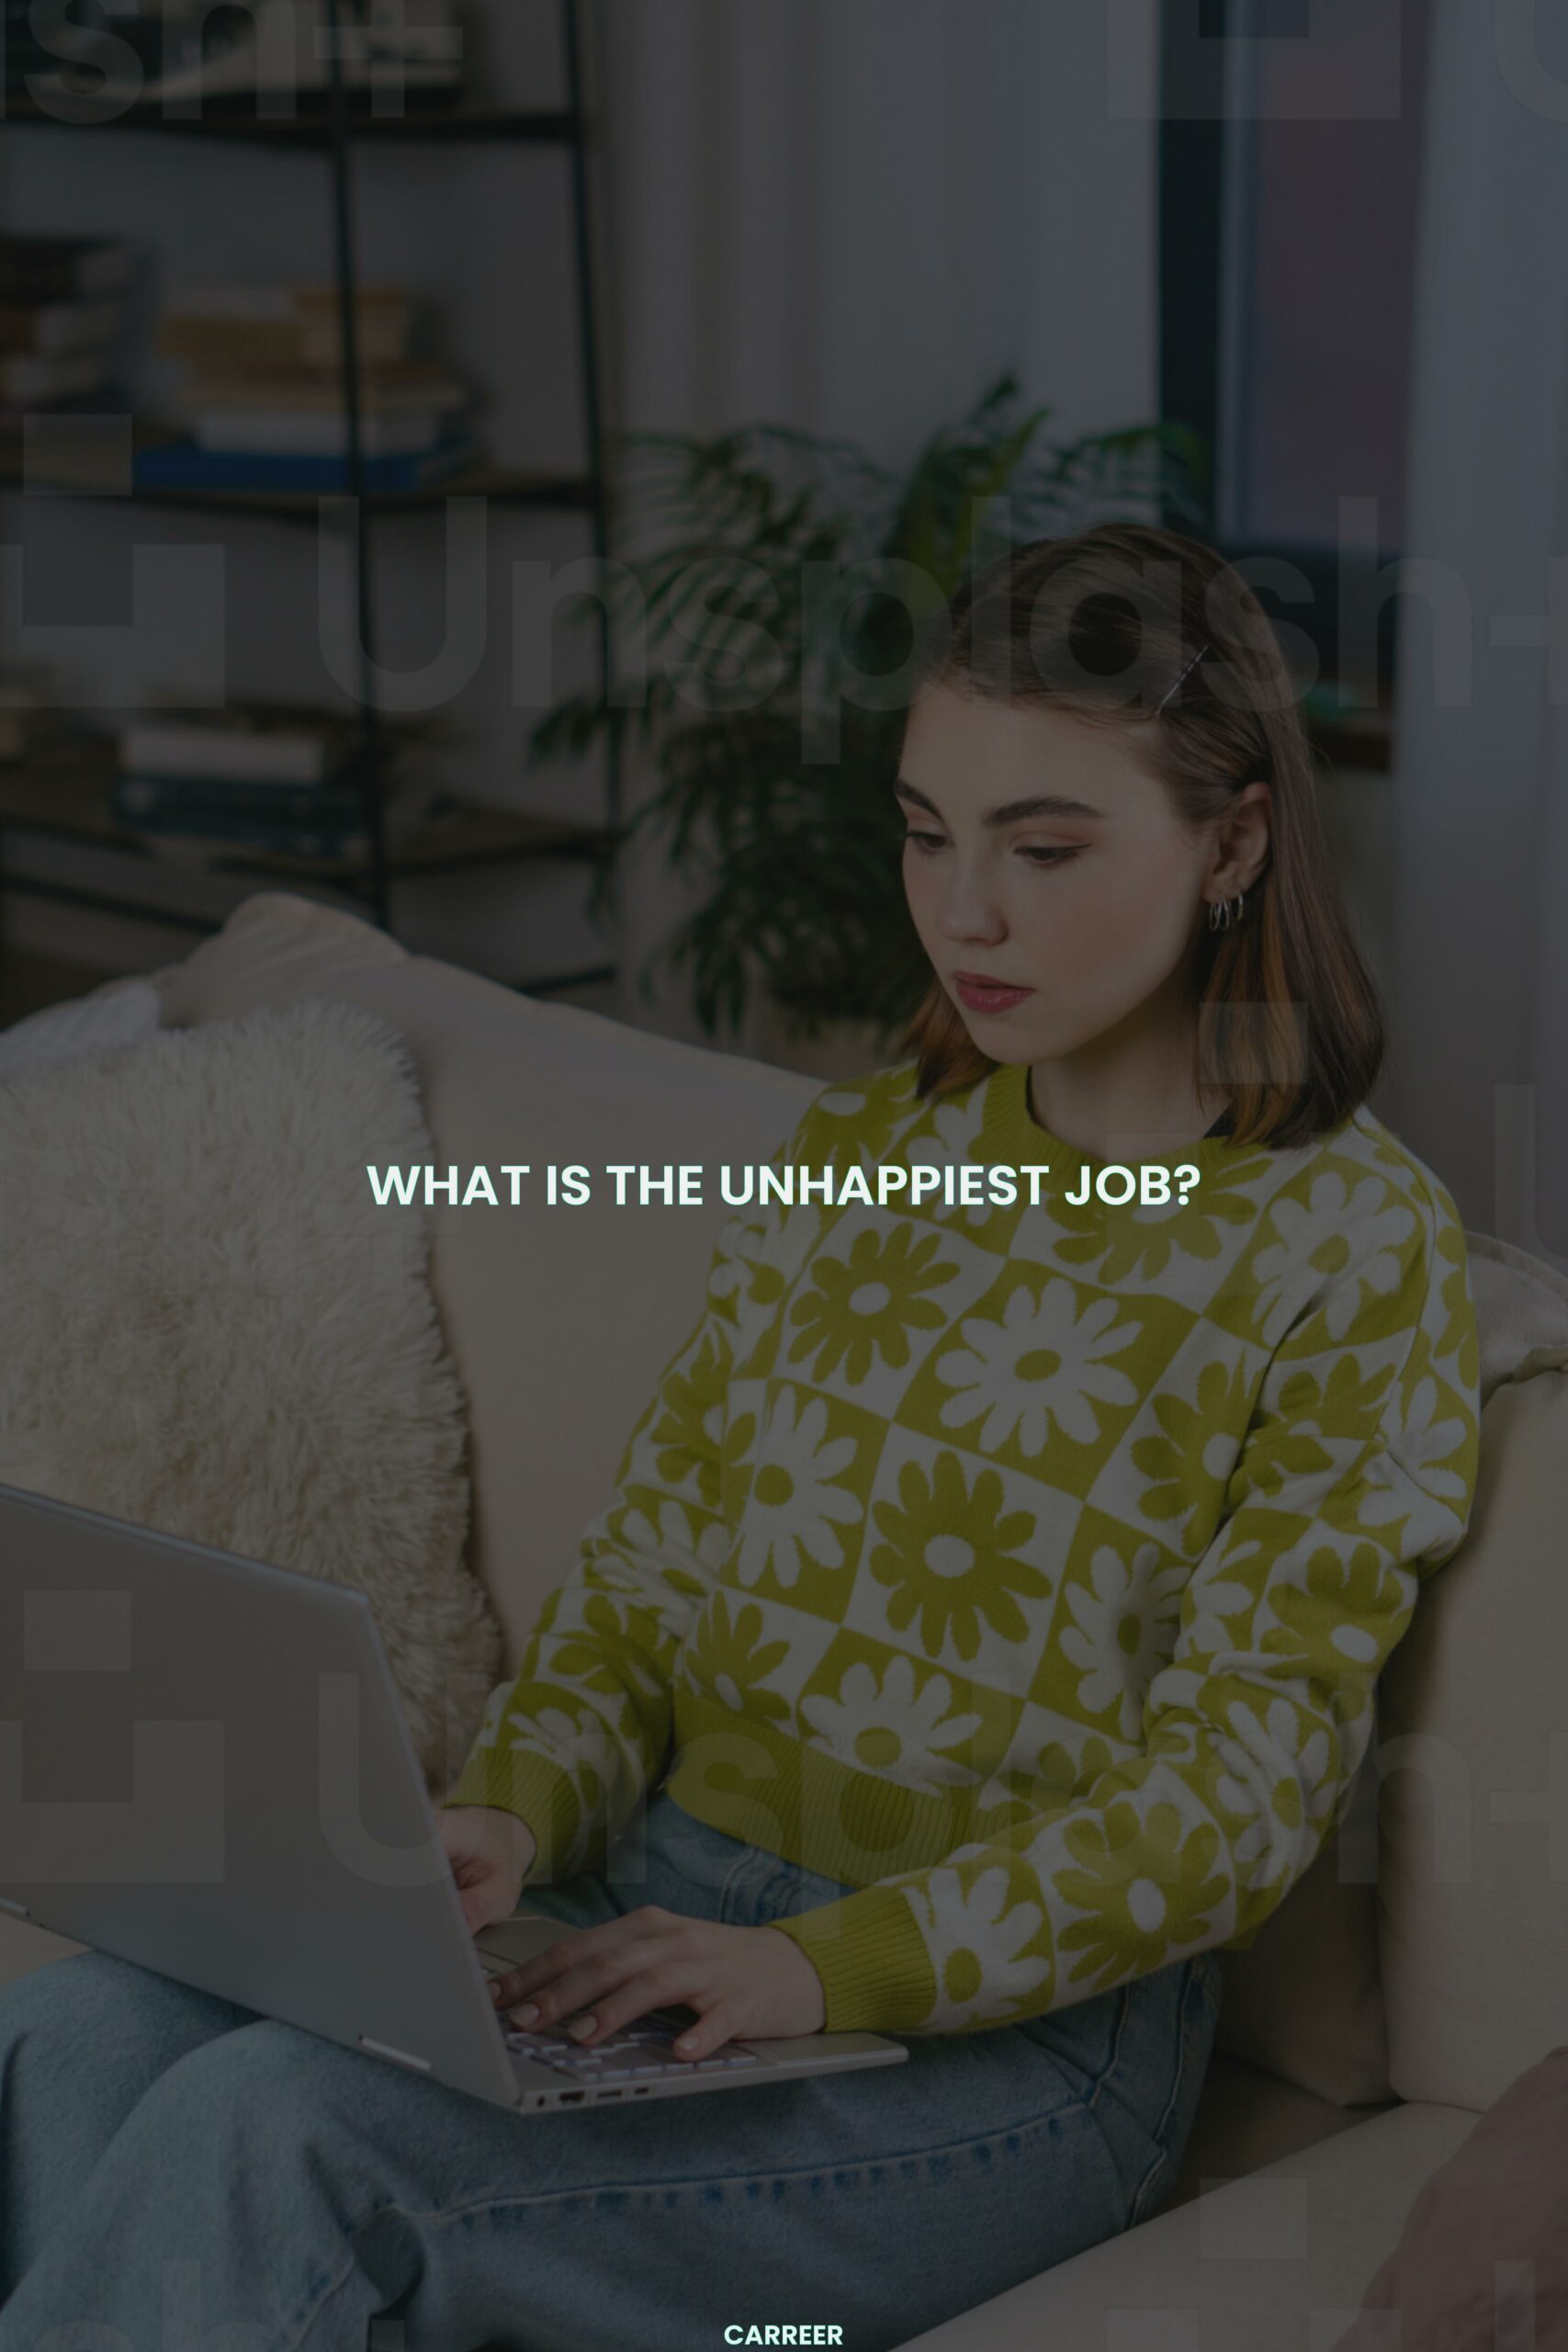 What is the unhappiest job?